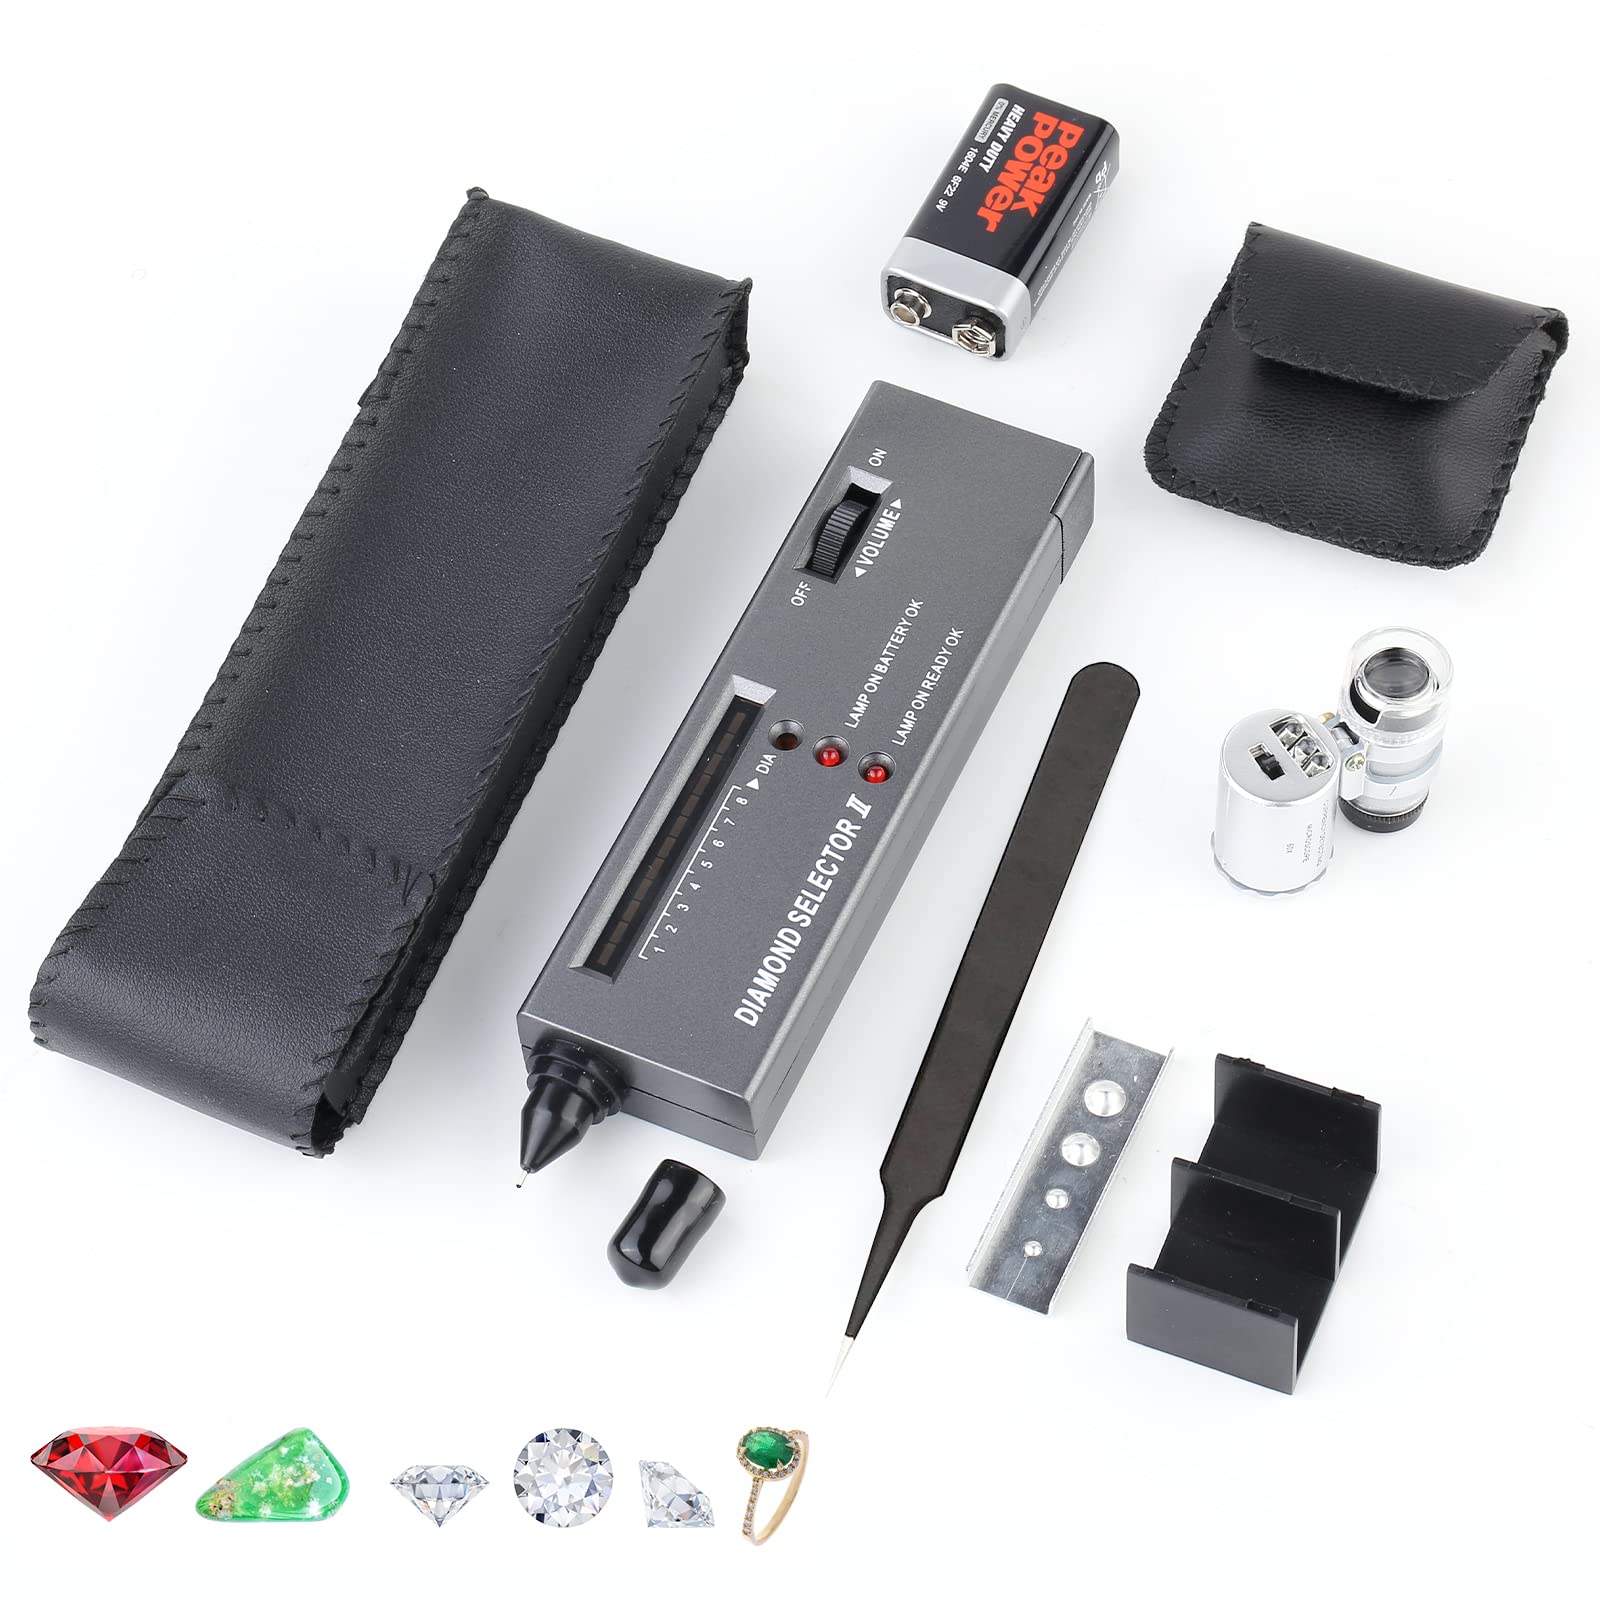  Gold Testing Kit, Diamond Tester Gold Tester Machine Portable  for Jewelry Diamond Moissanite Test : Arts, Crafts & Sewing